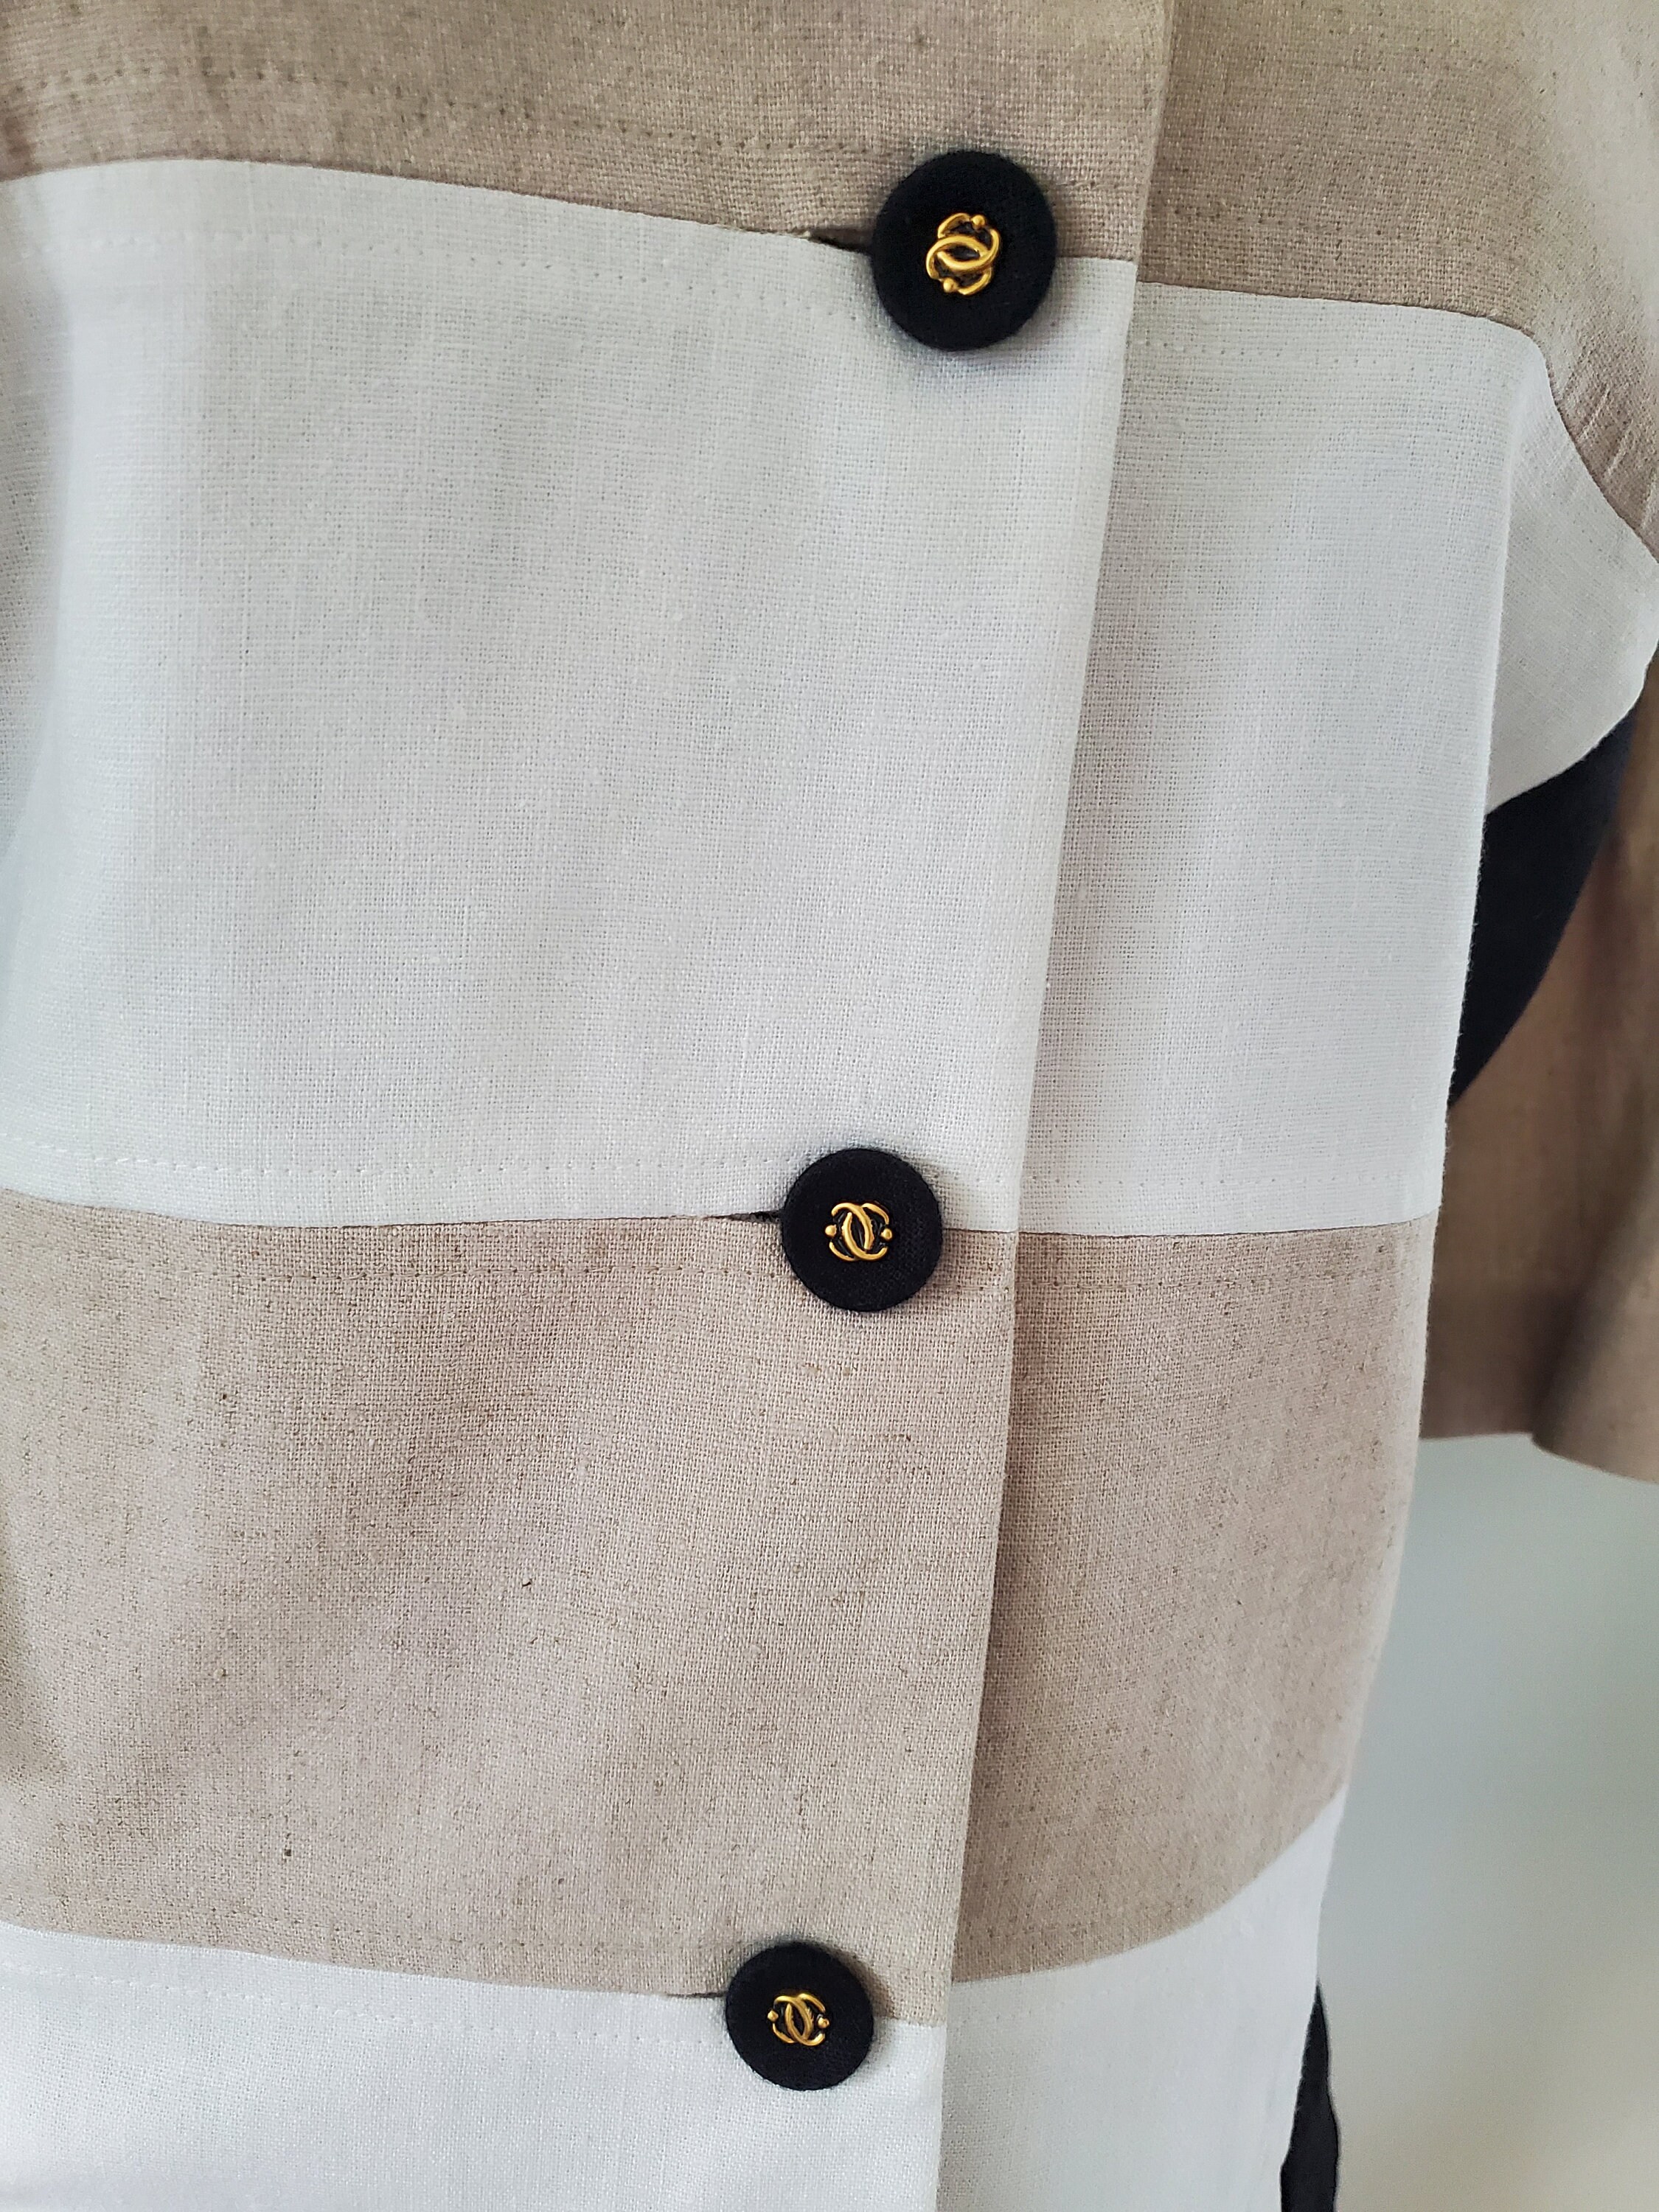 Chanel Vintage Beige Wool Two-Piece Jacket and Skirt Suit